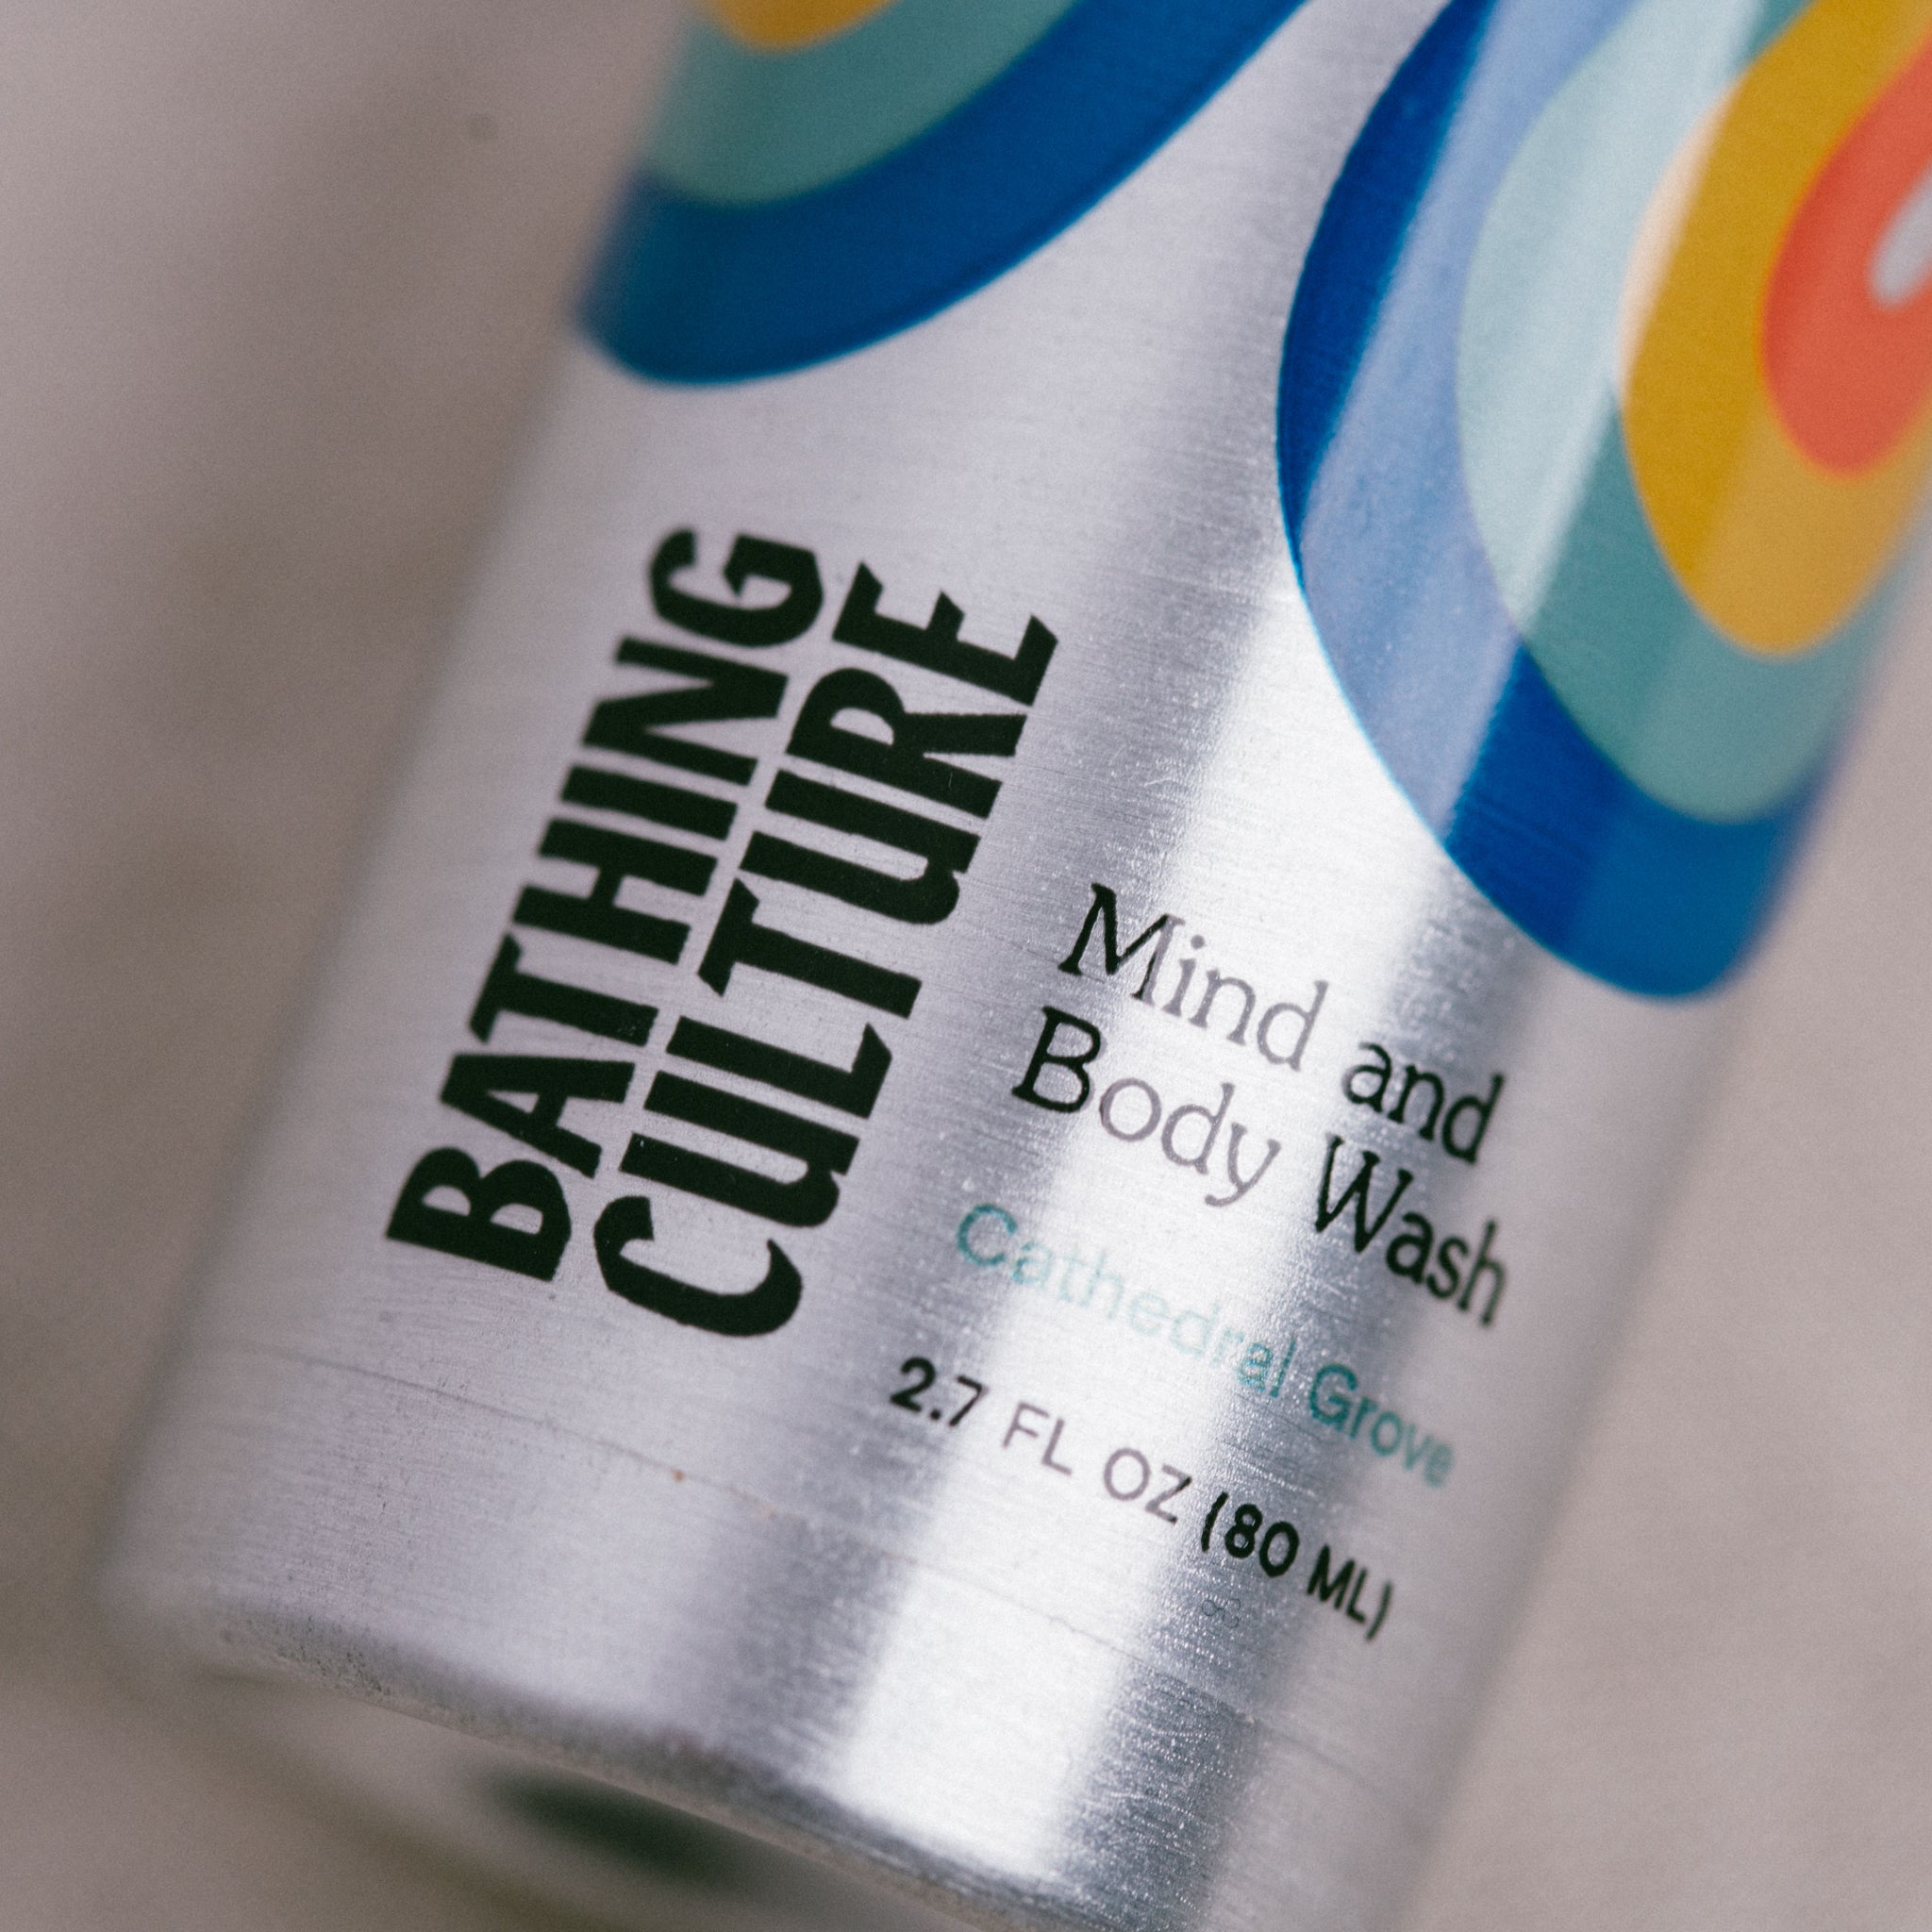 CATHEDRAL GROVE MIND & BODY WASH || BATHING CULTURE